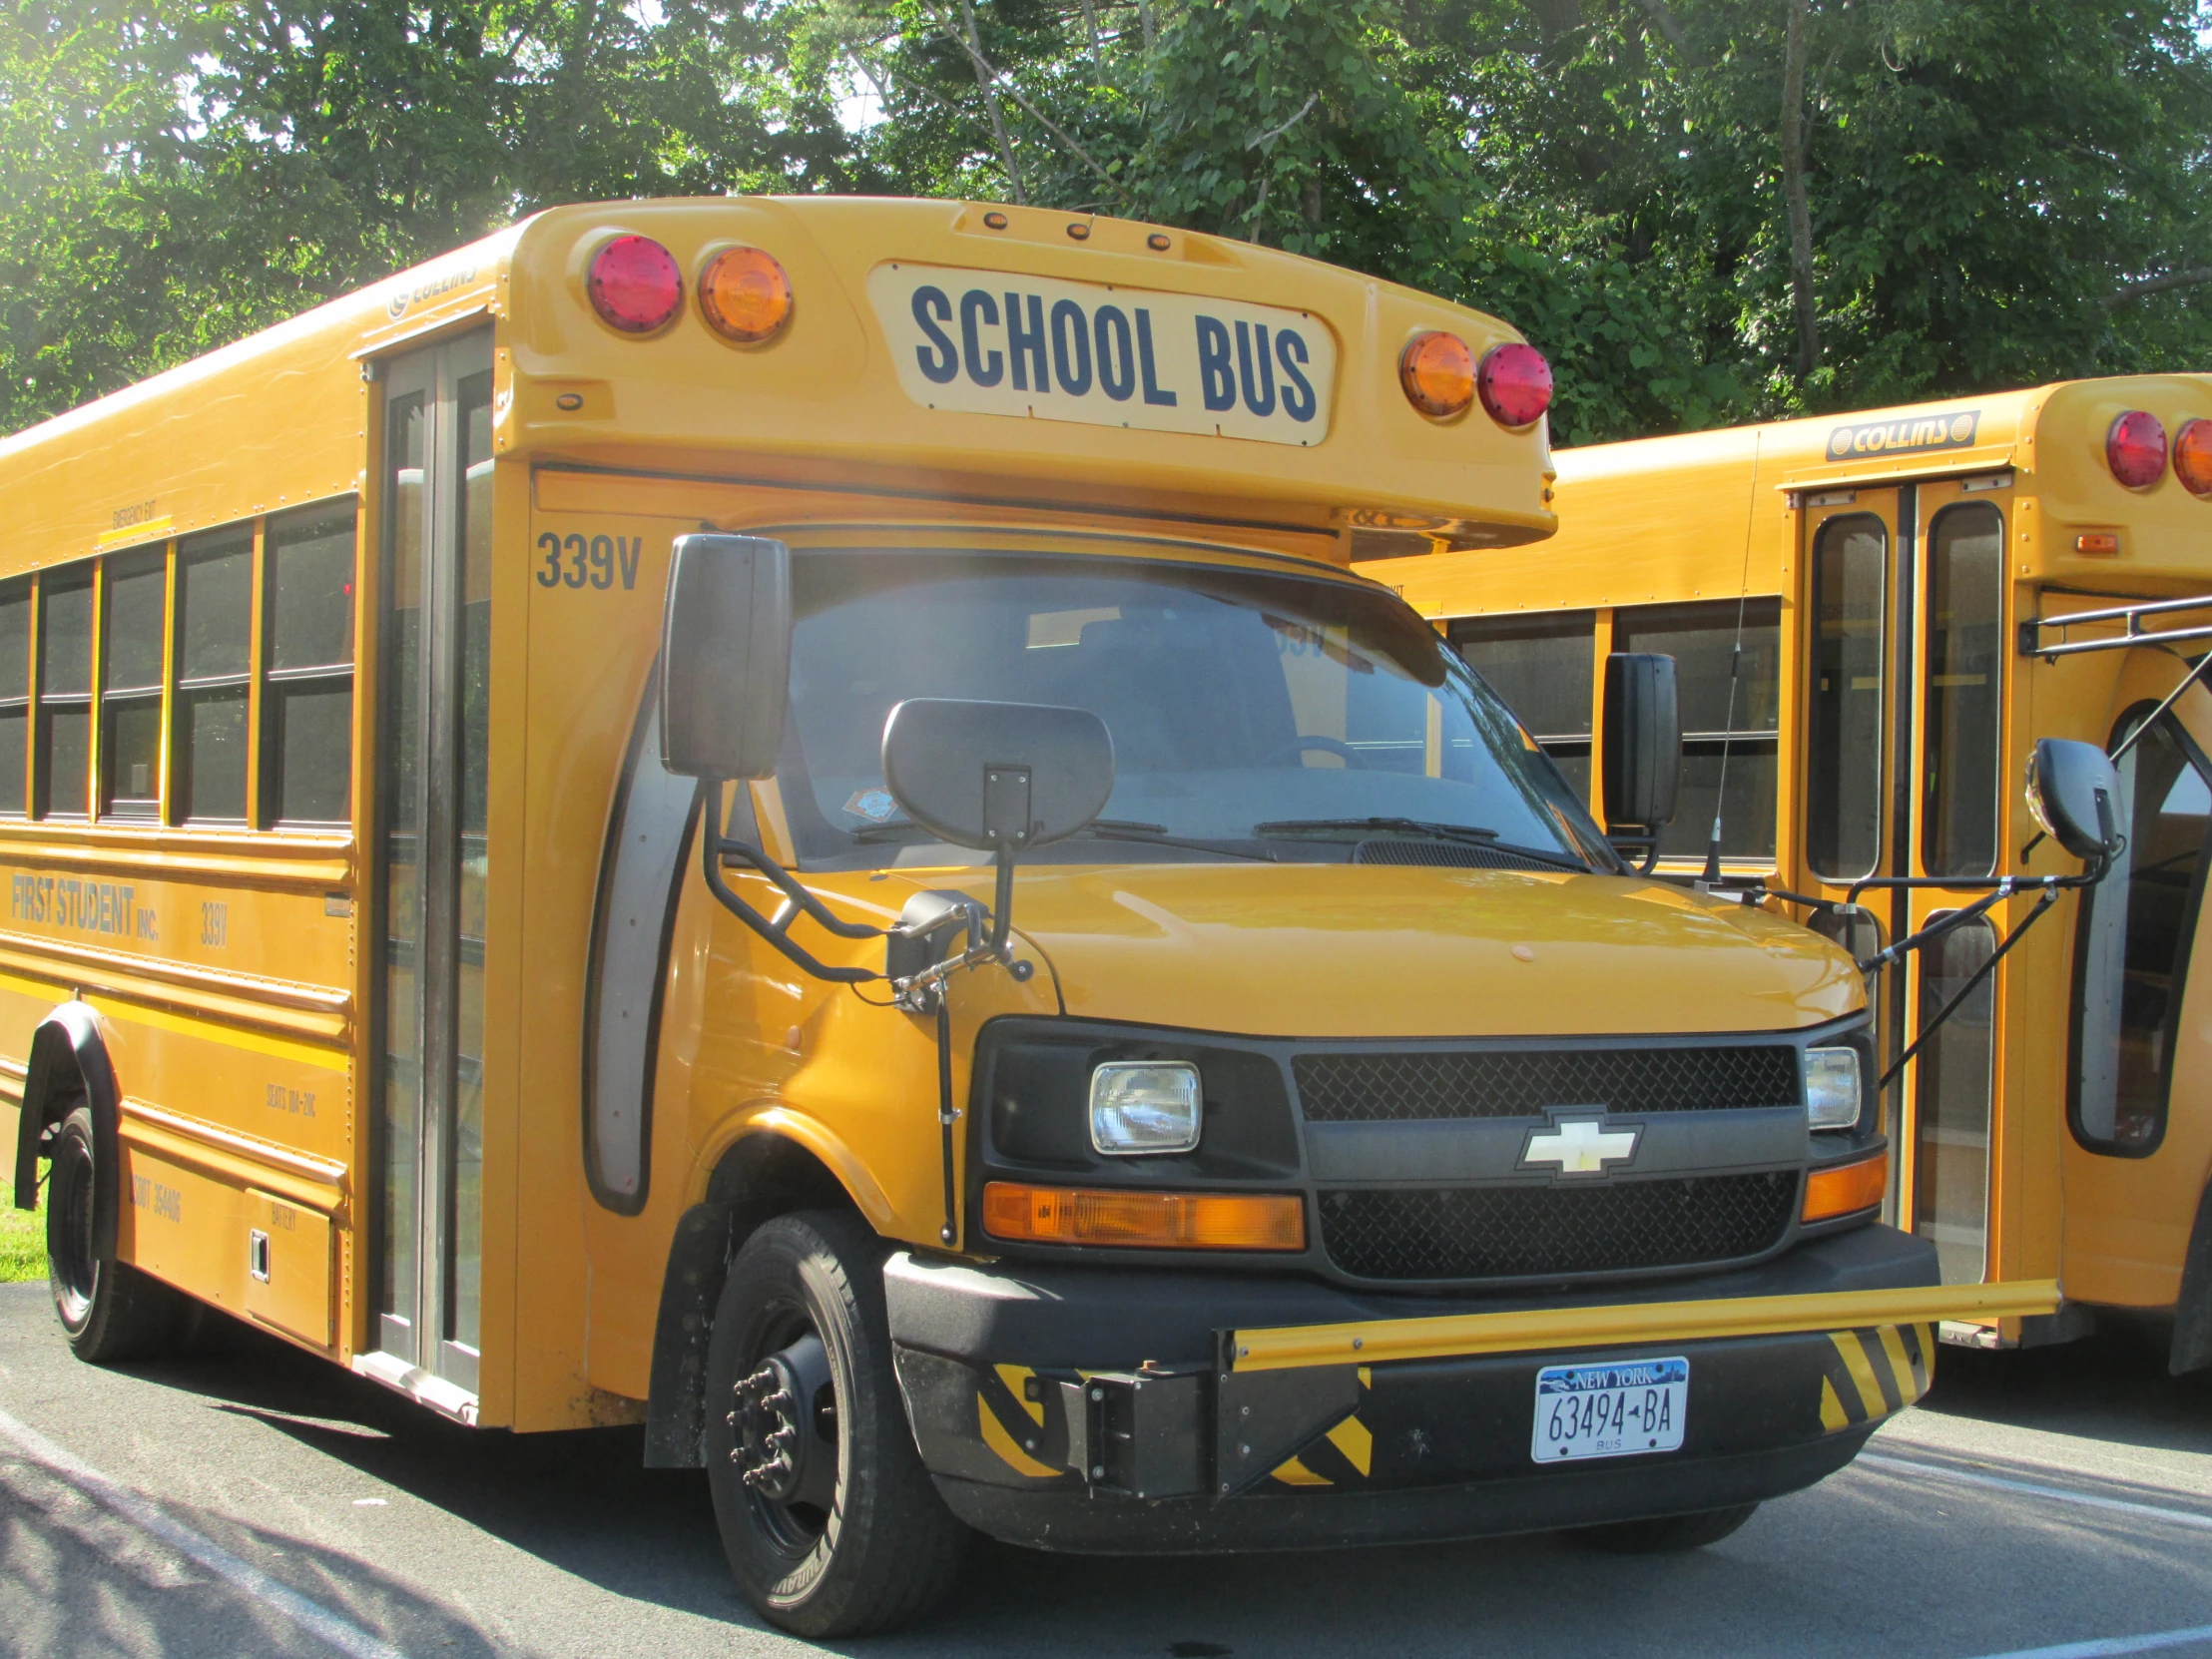 several school buses parked together on the side of the road